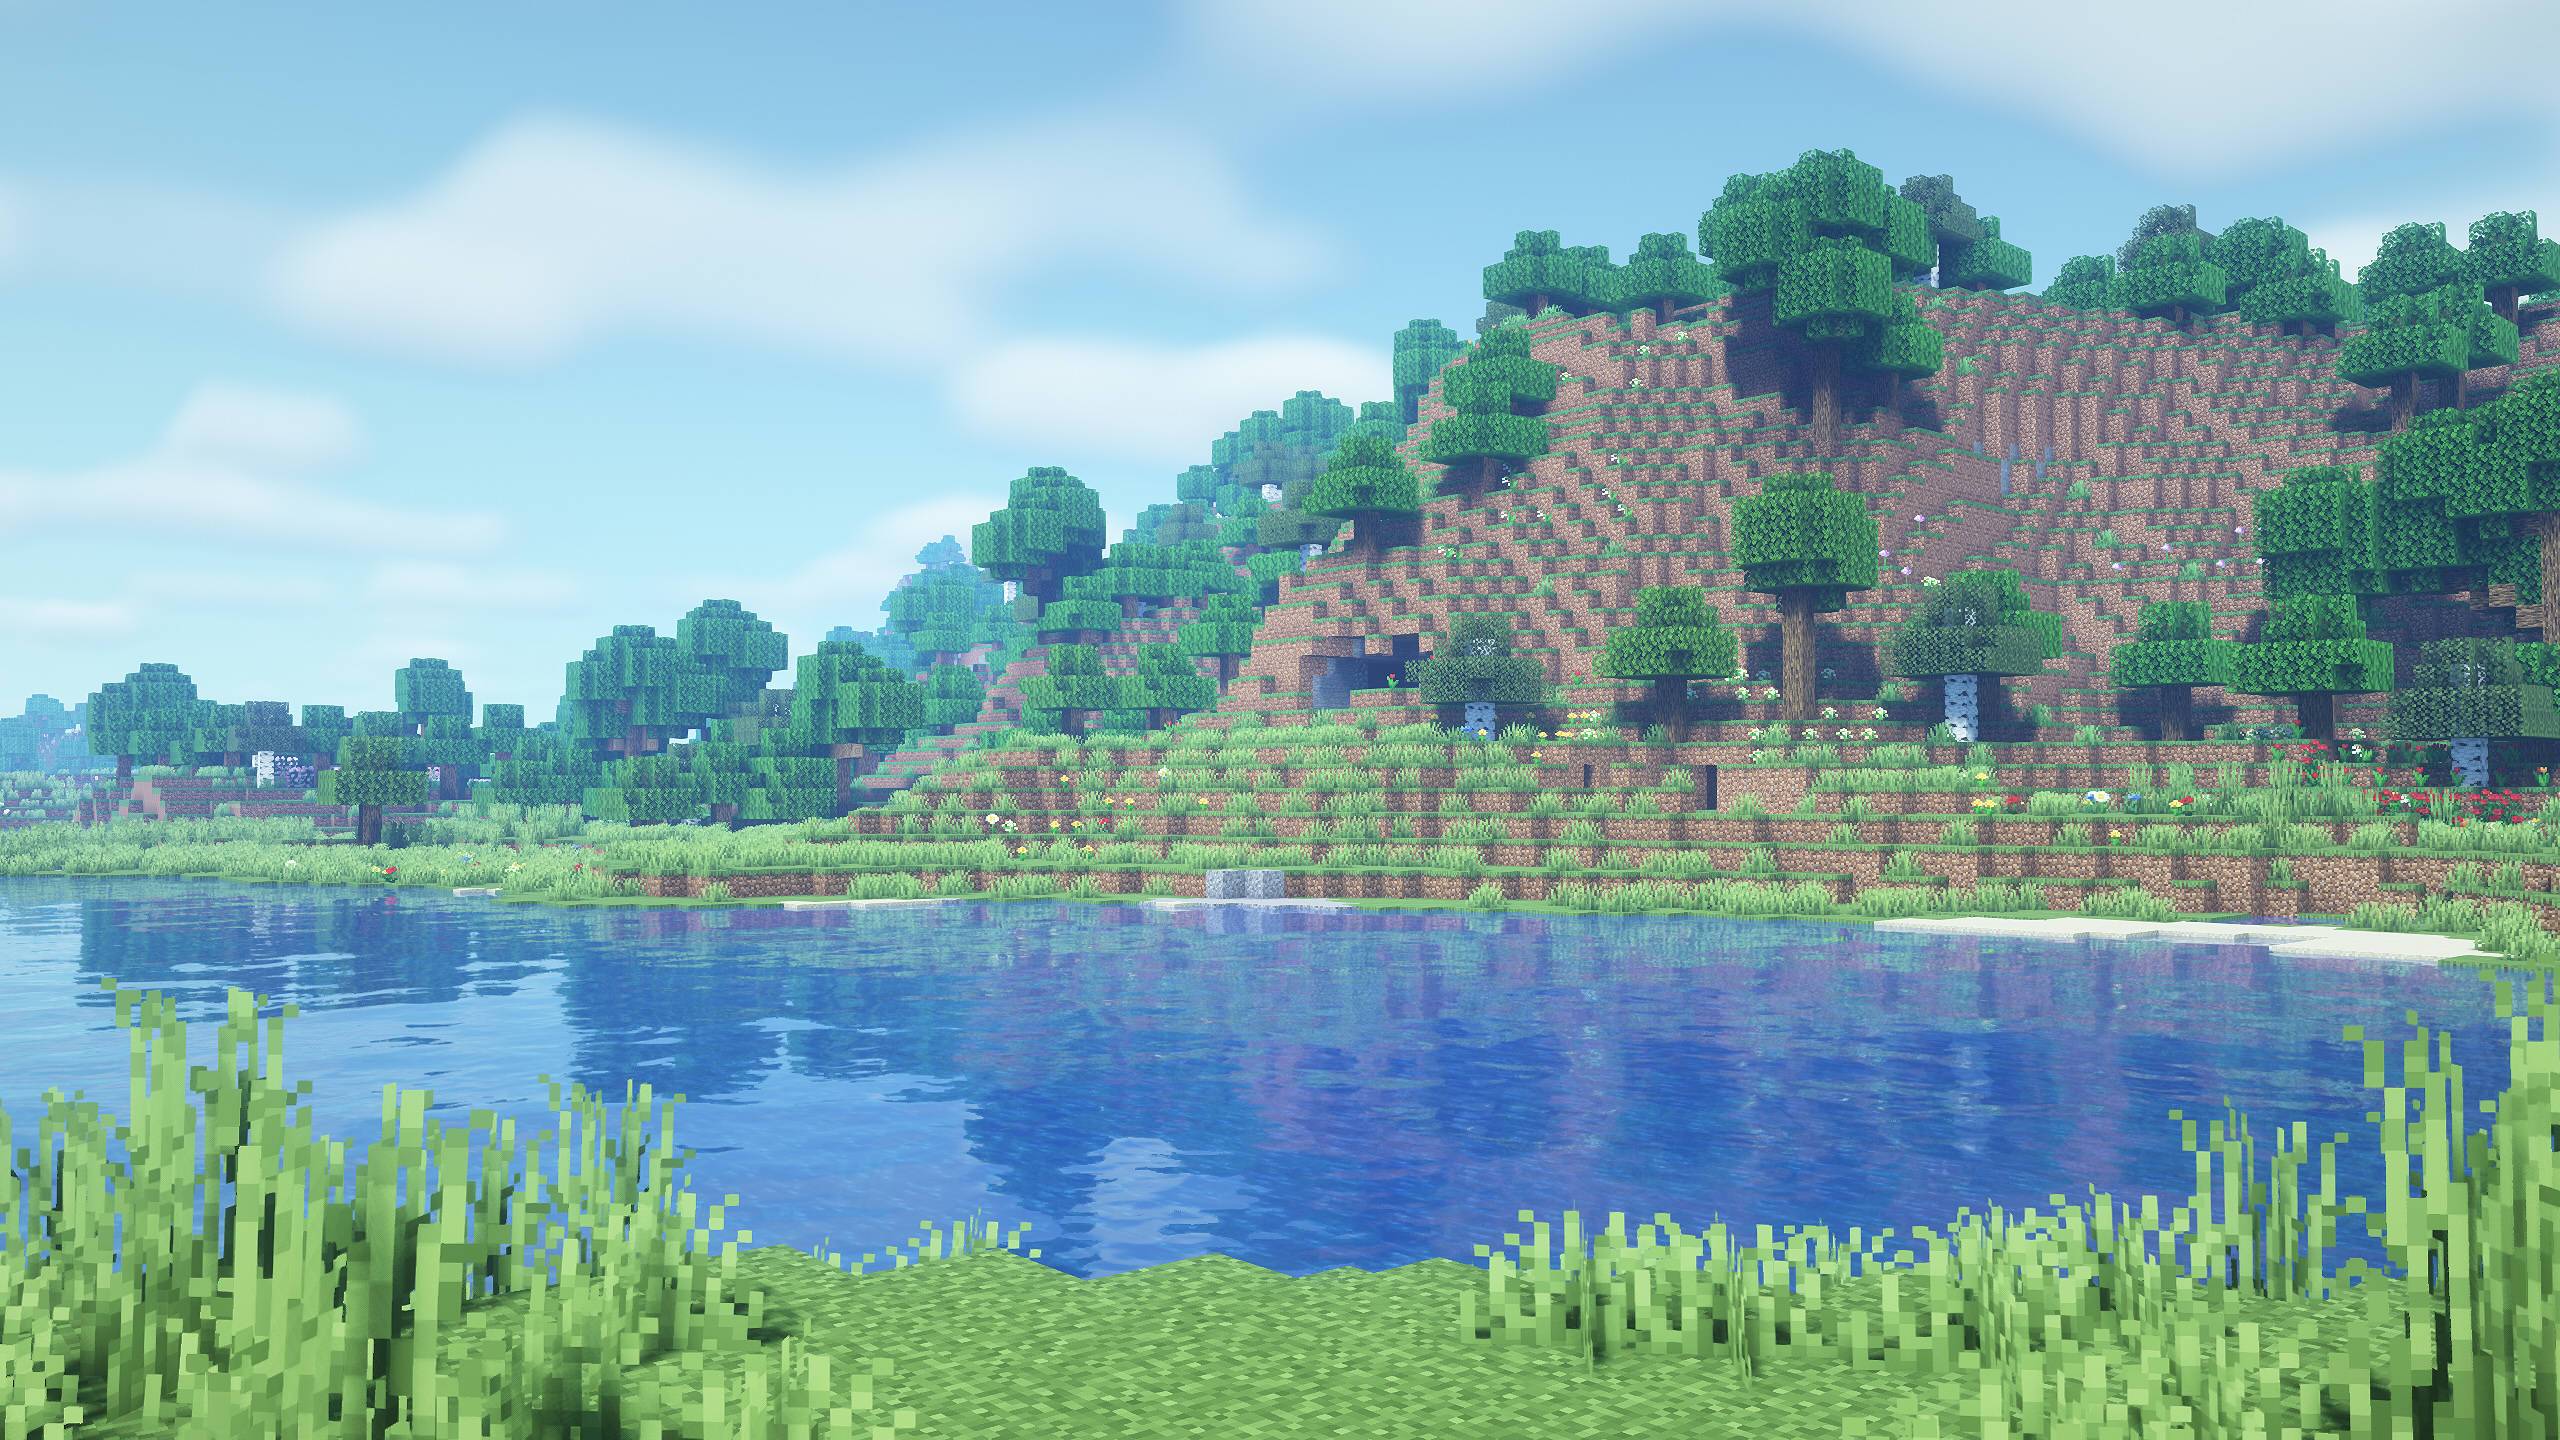 images/2406/14/river_OPAL_Shaders_1.jpg